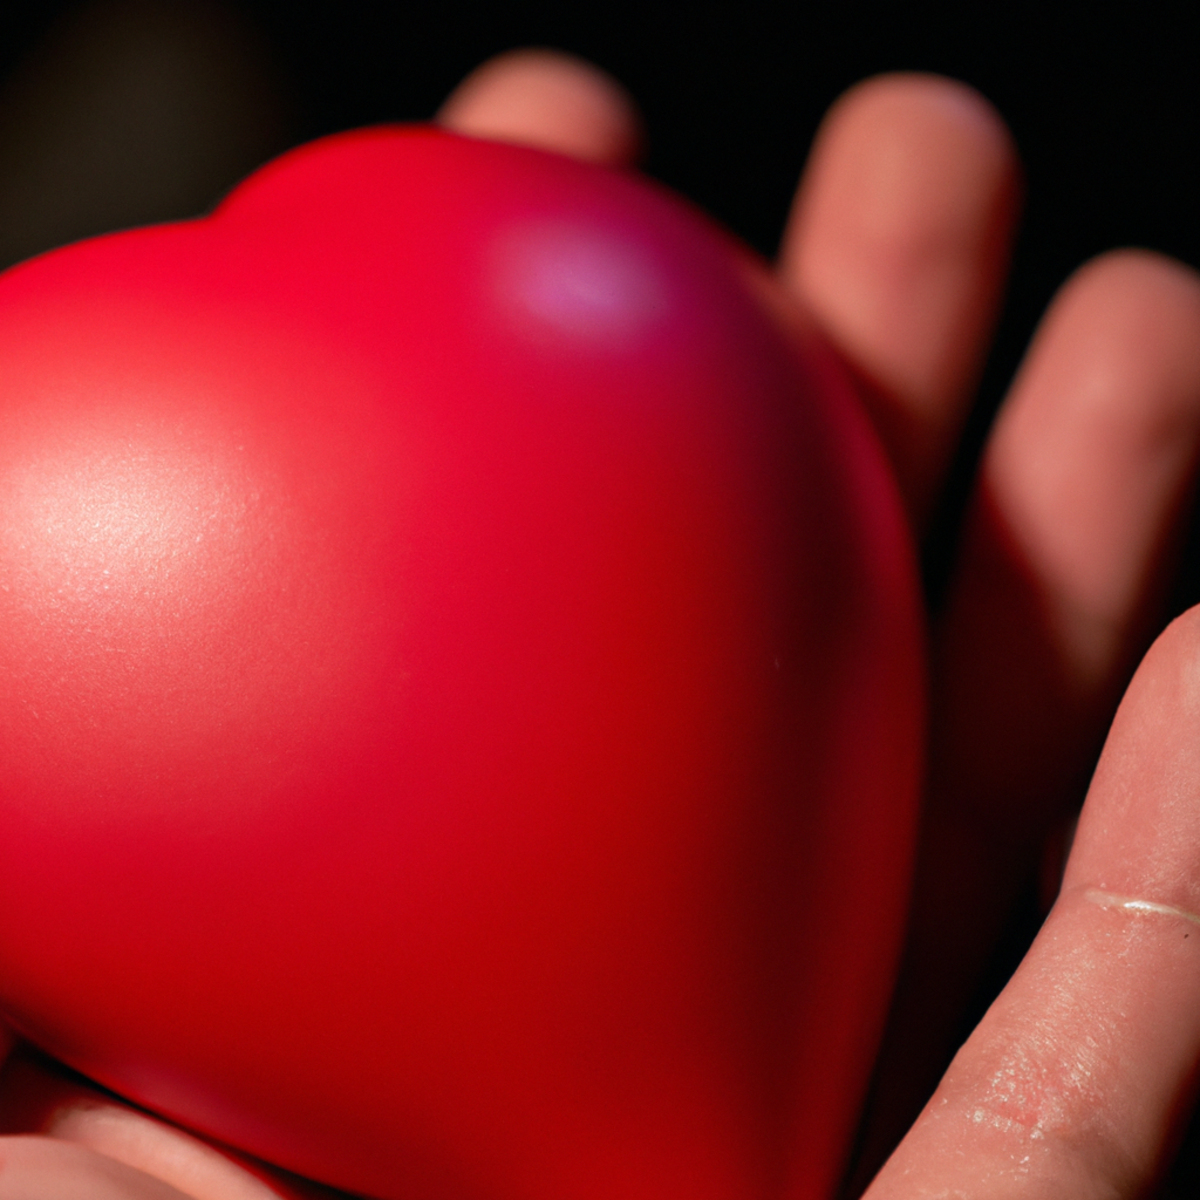 Close-up of a trembling hand squeezing a red foam heart-shaped stress ball, symbolizing the impact of stress on the heart - Takotsubo Cardiomyopathy (Broken Heart Syndrome)